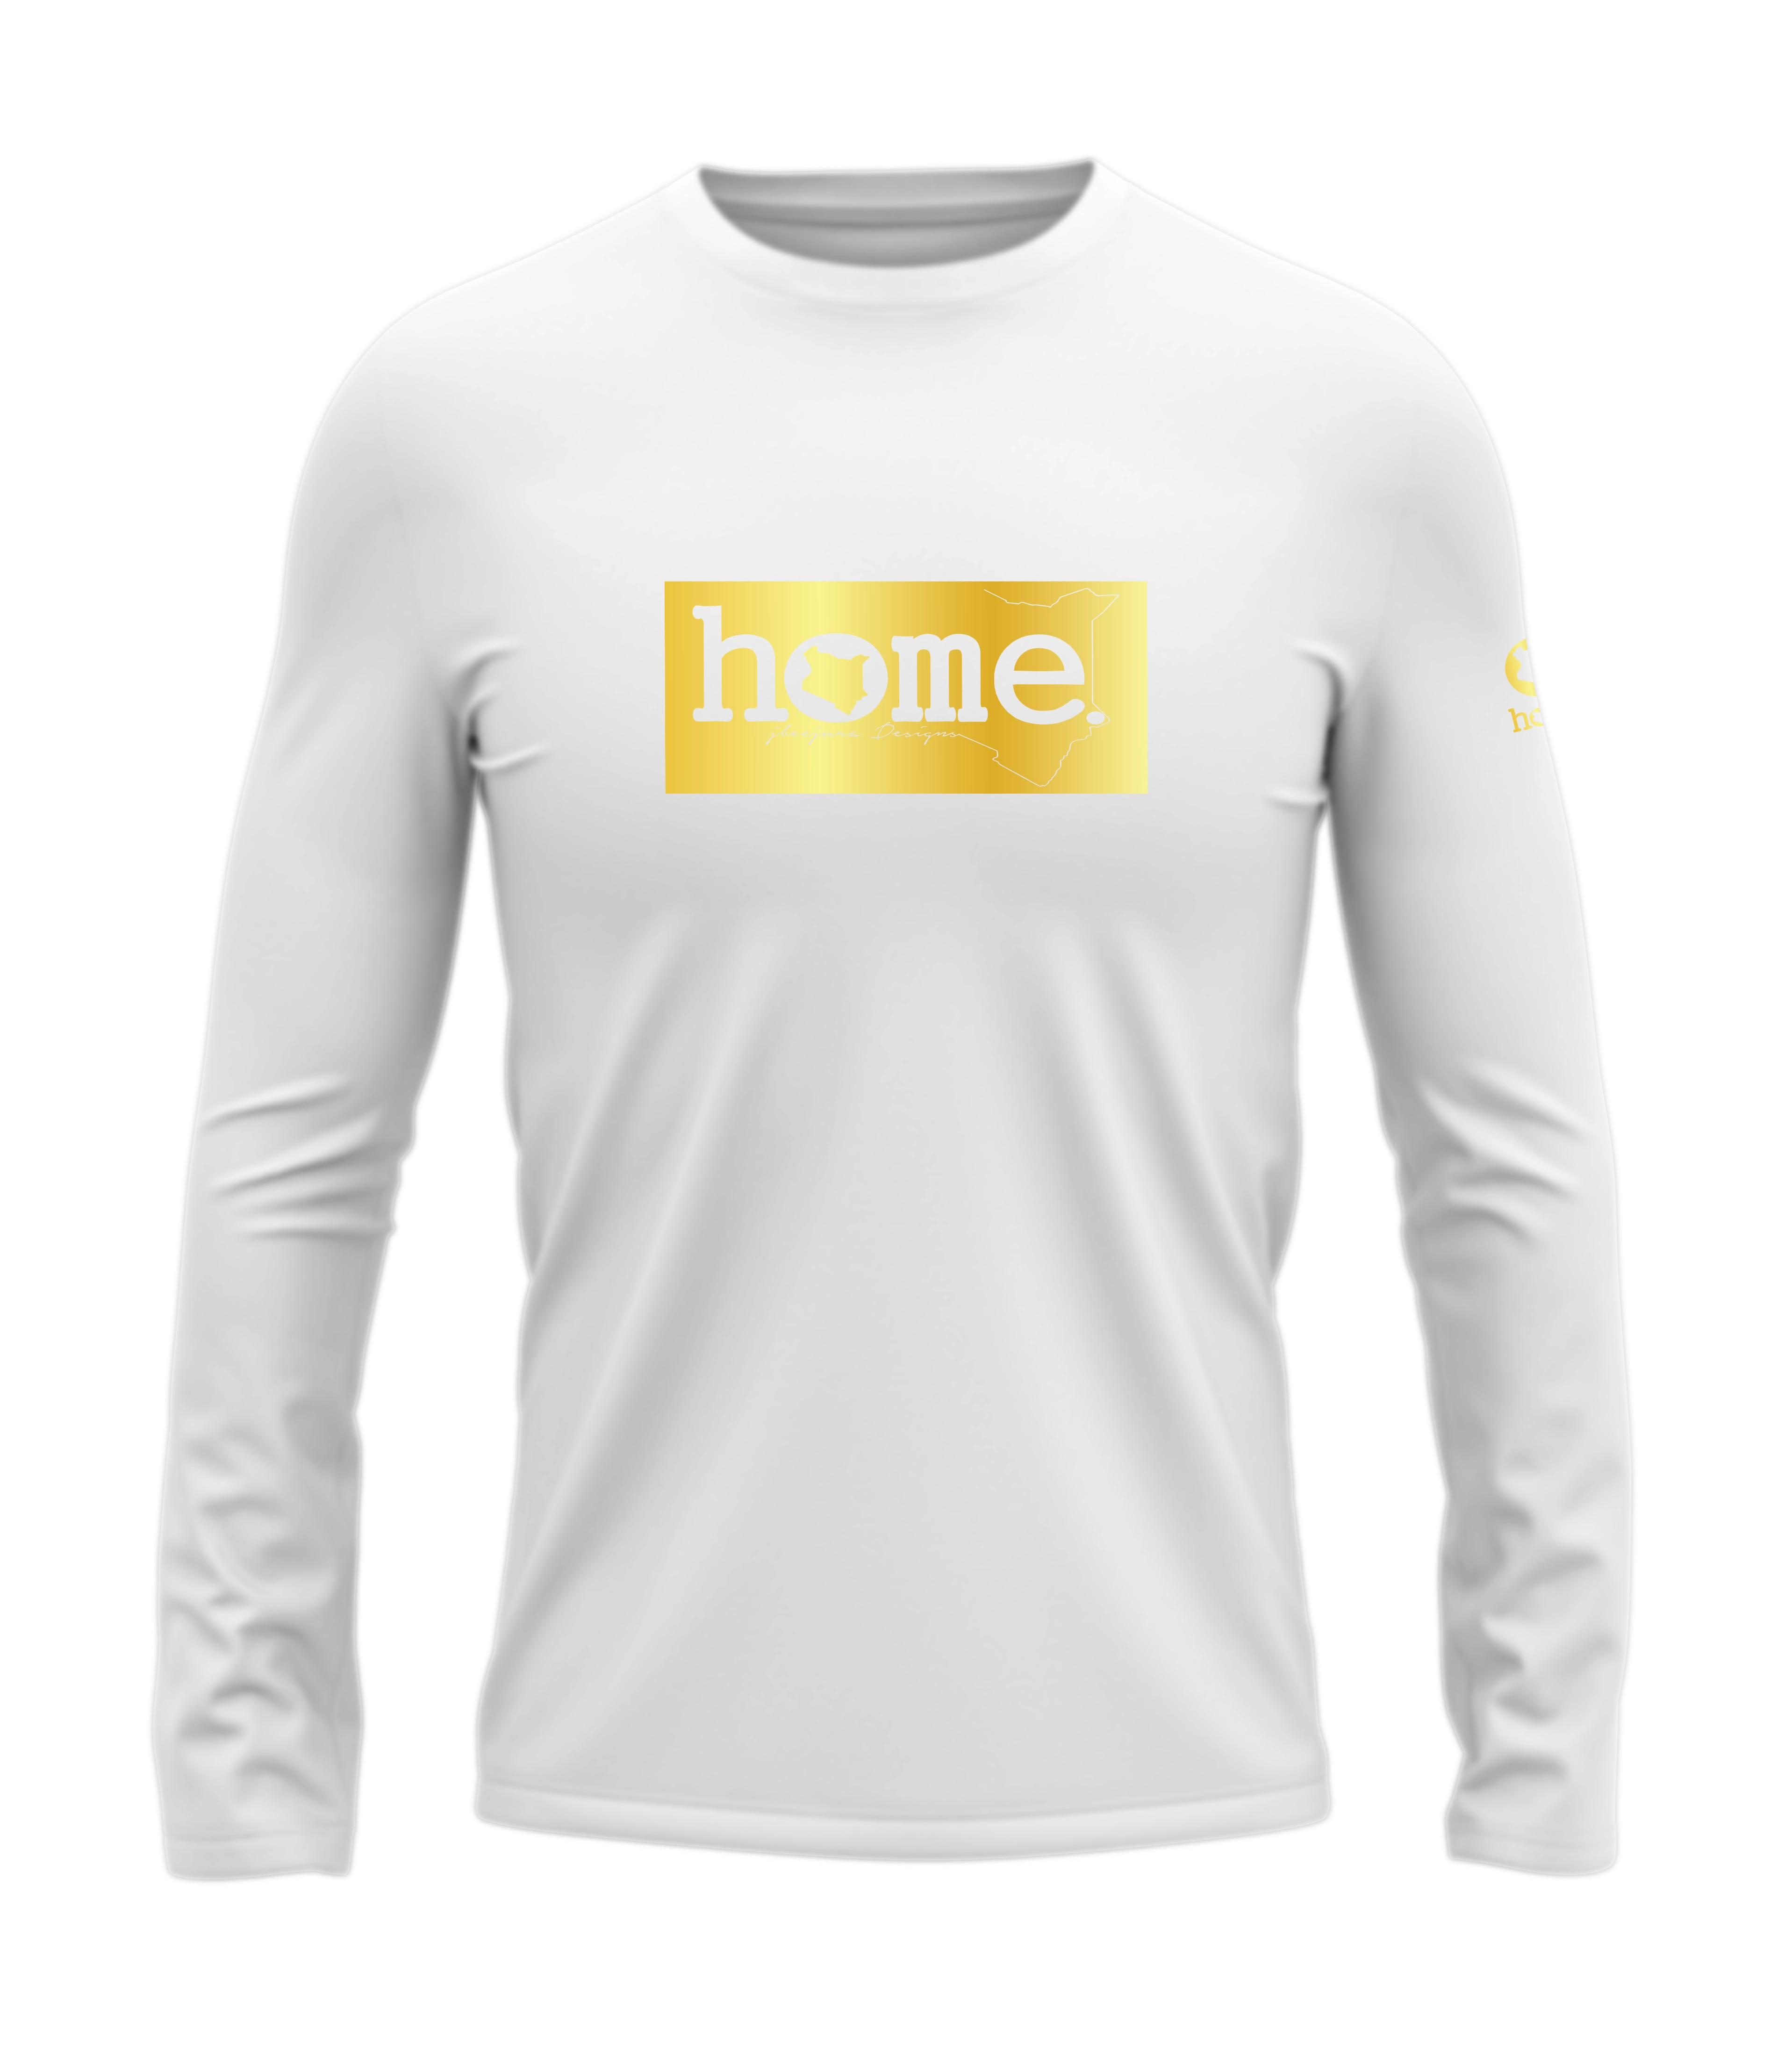 home_254 LONG-SLEEVED WHITE T-SHIRT WITH A GOLD CLASSIC PRINT – COTTON PLUS FABRIC